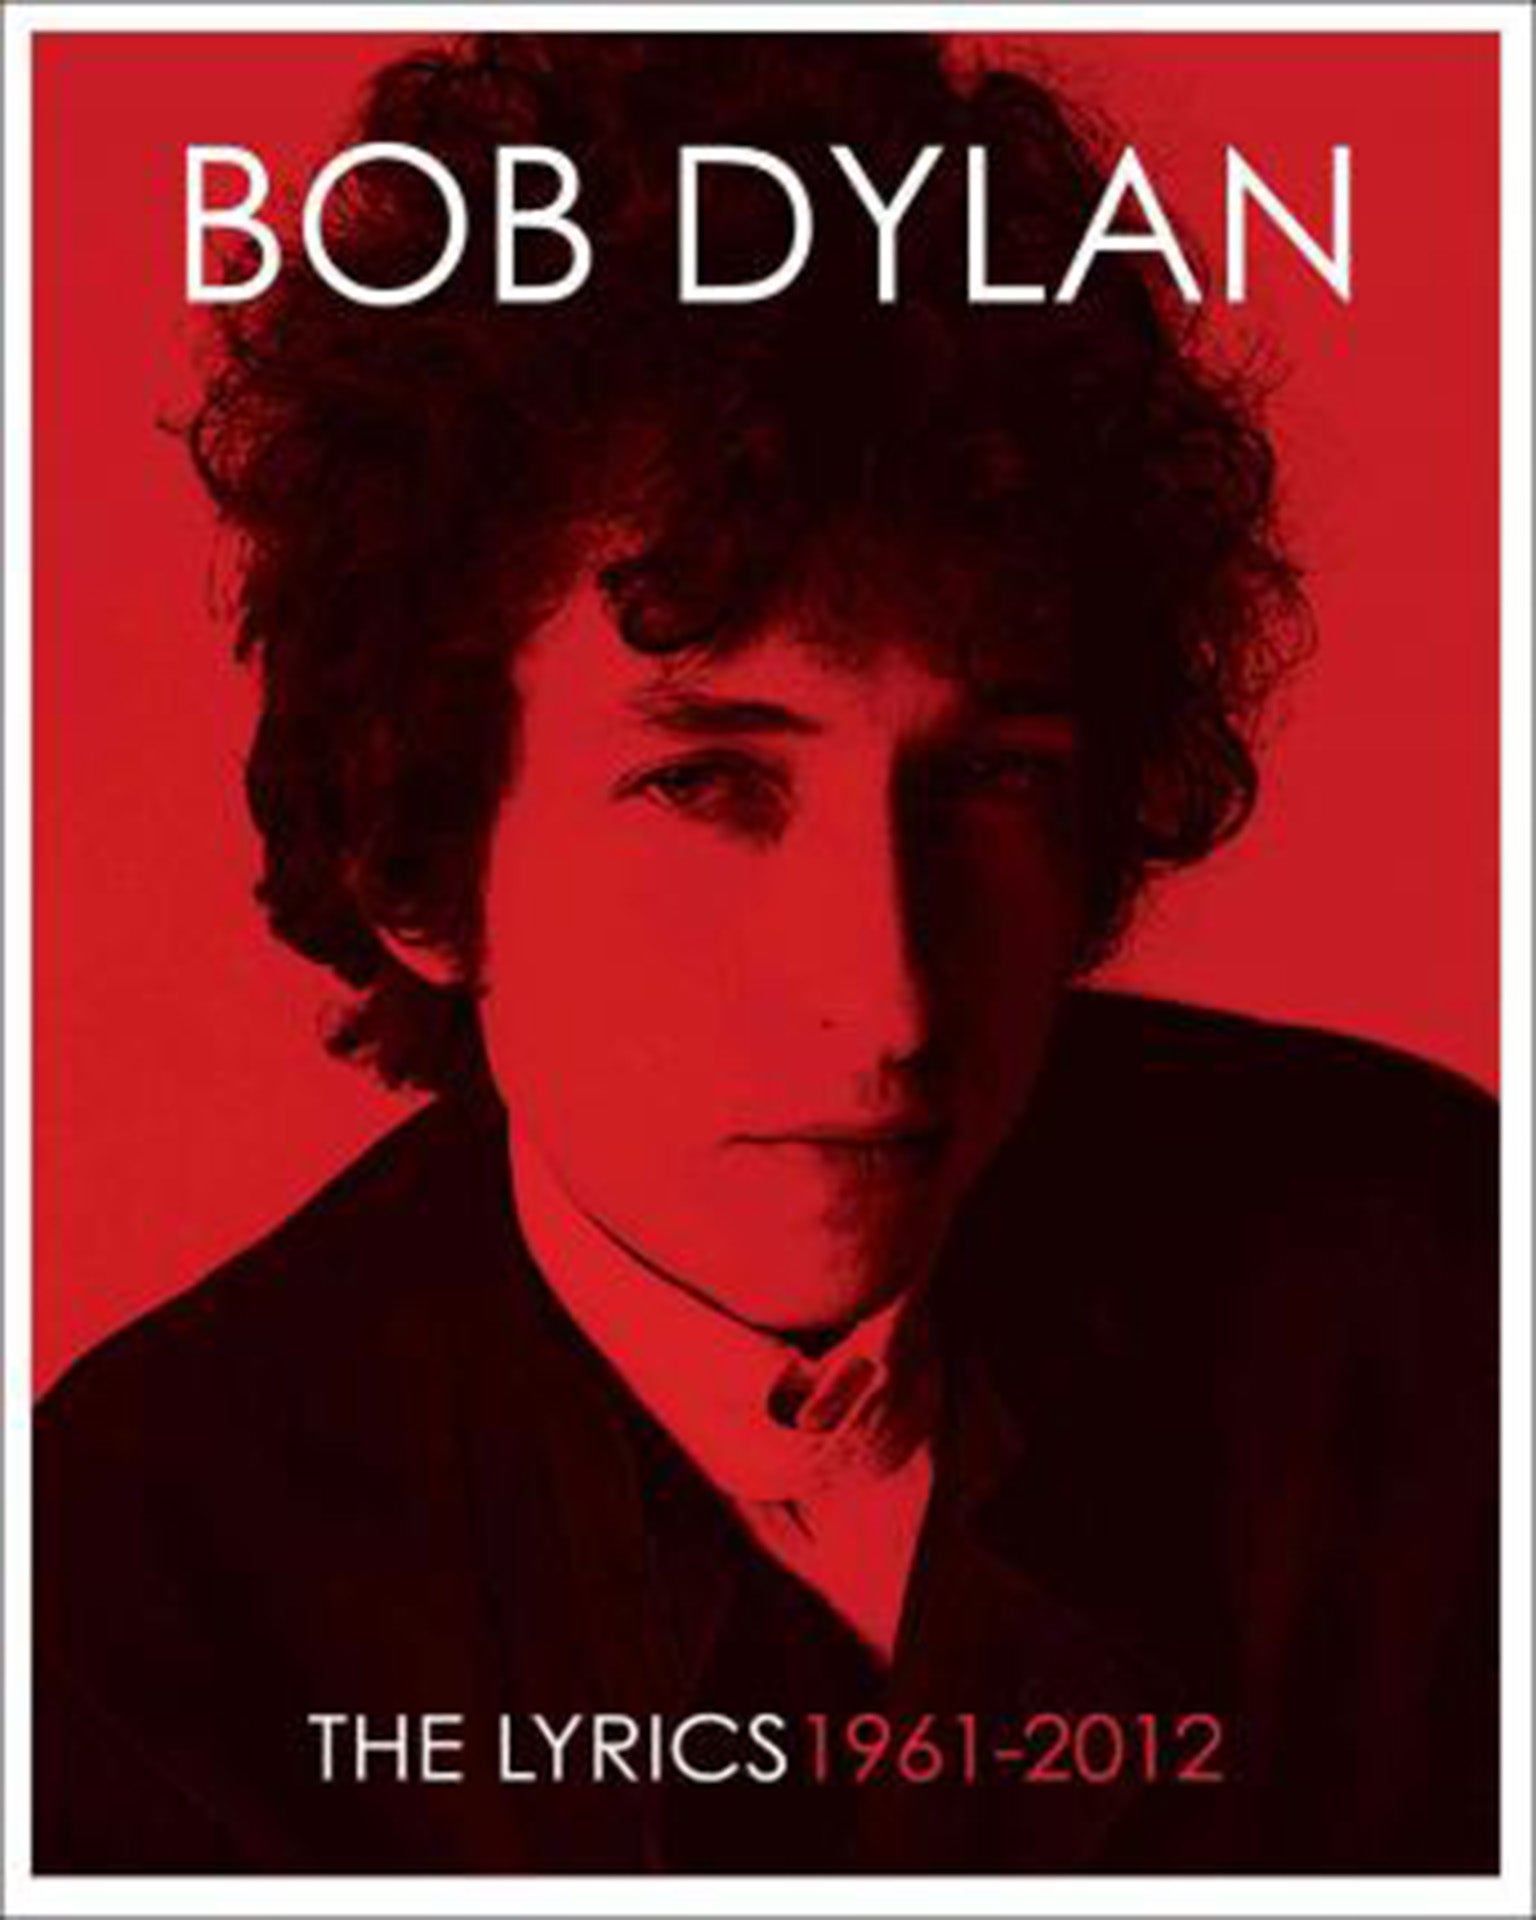 Bob Dylan’s ‘The Lyrics’ first came out in the mid-Eighties and was updated in 2012 (Simon and Schuster)